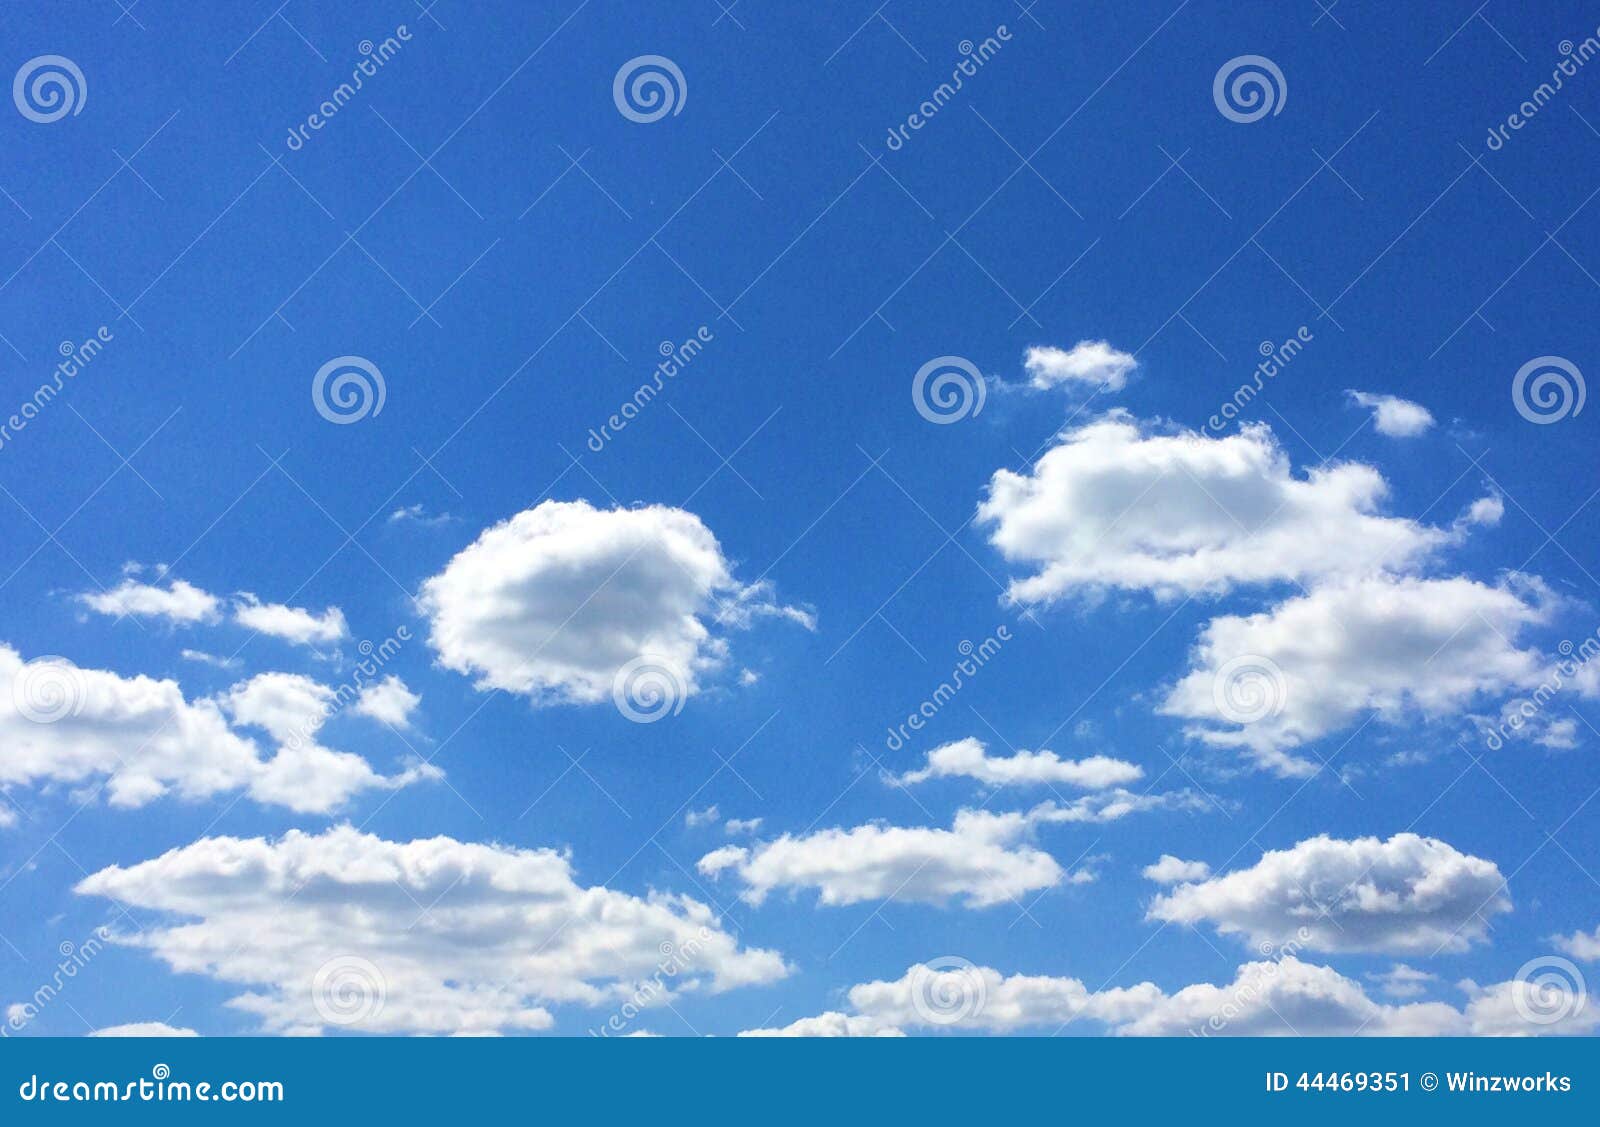 blue sky and white puffy clouds